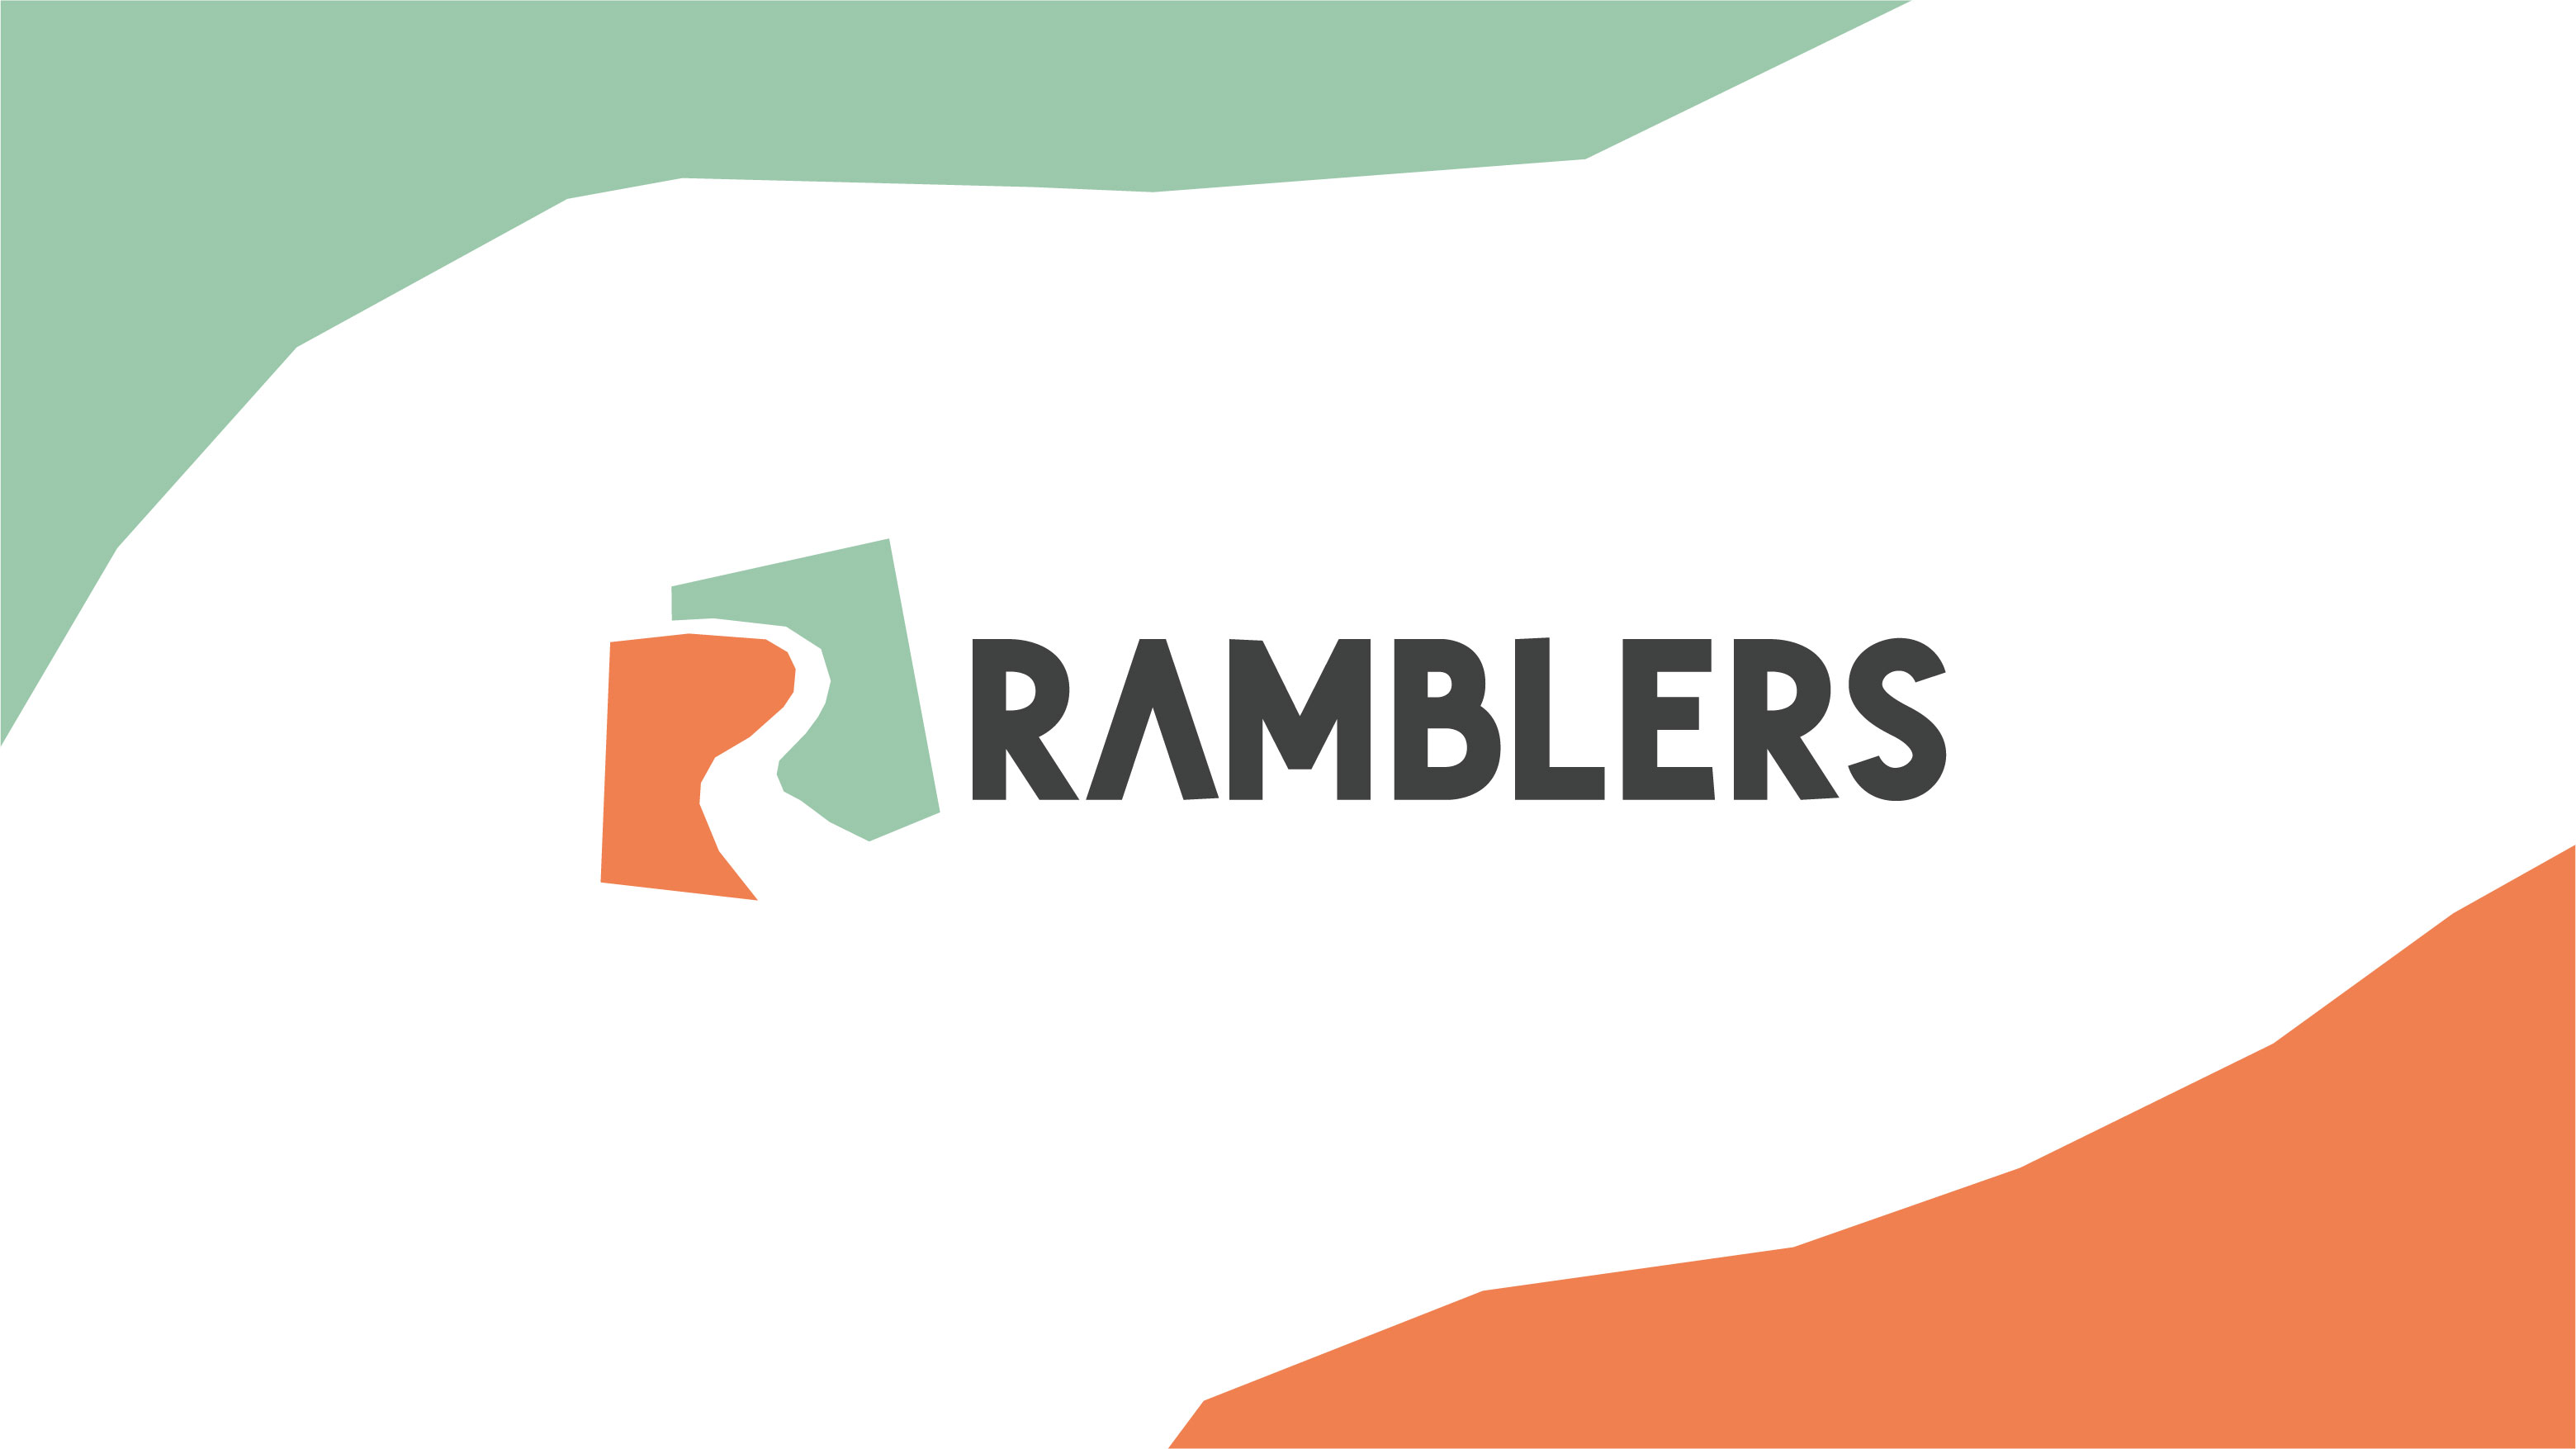 The Ramblers is ‘Opening the Way’ for Walkers with a Brand Overhaul